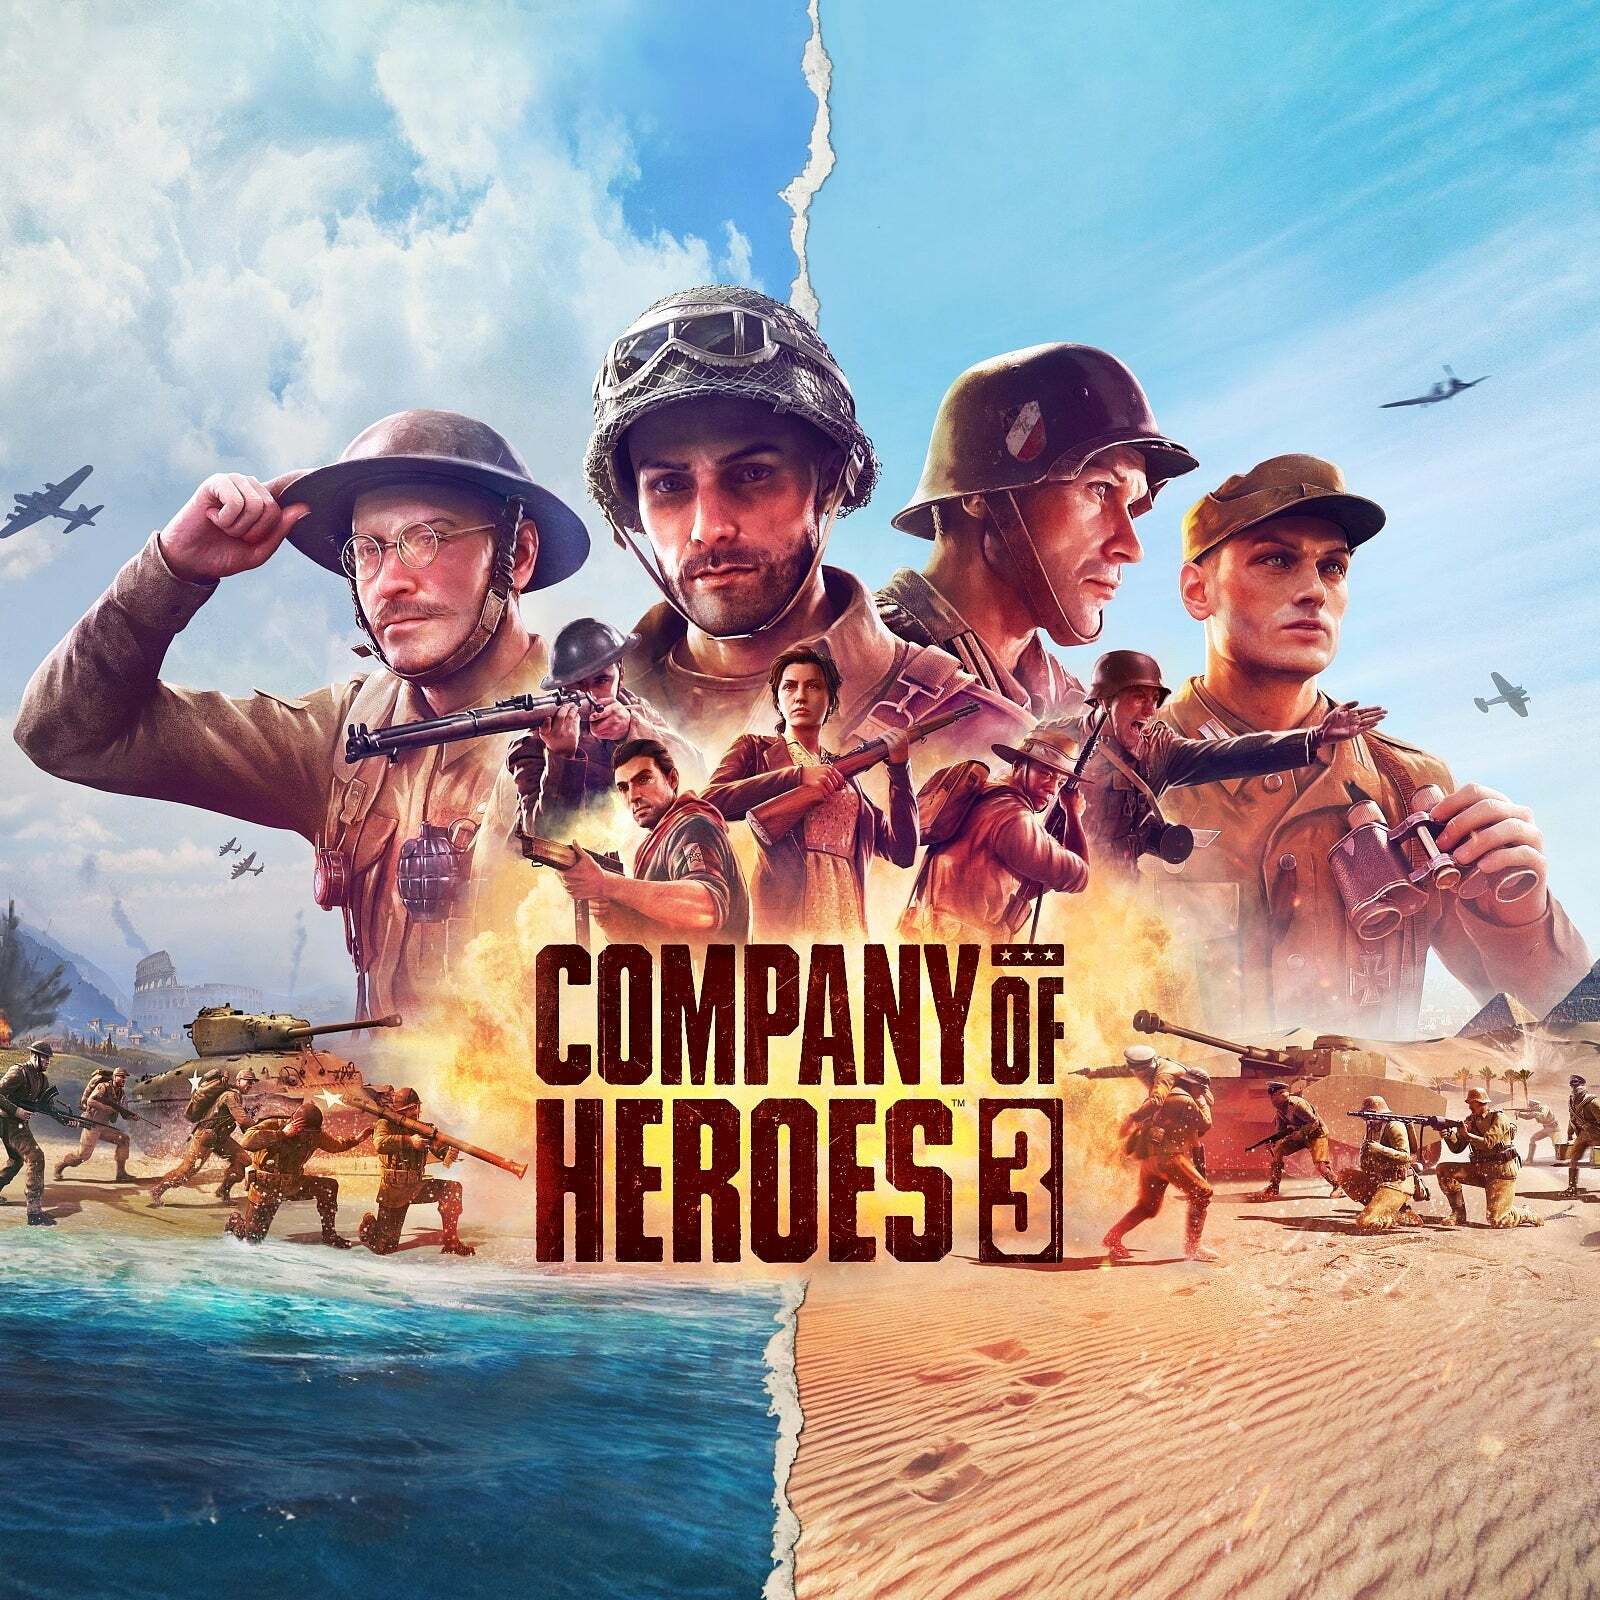 Company of Heroes 3 is here, is your PC ready?